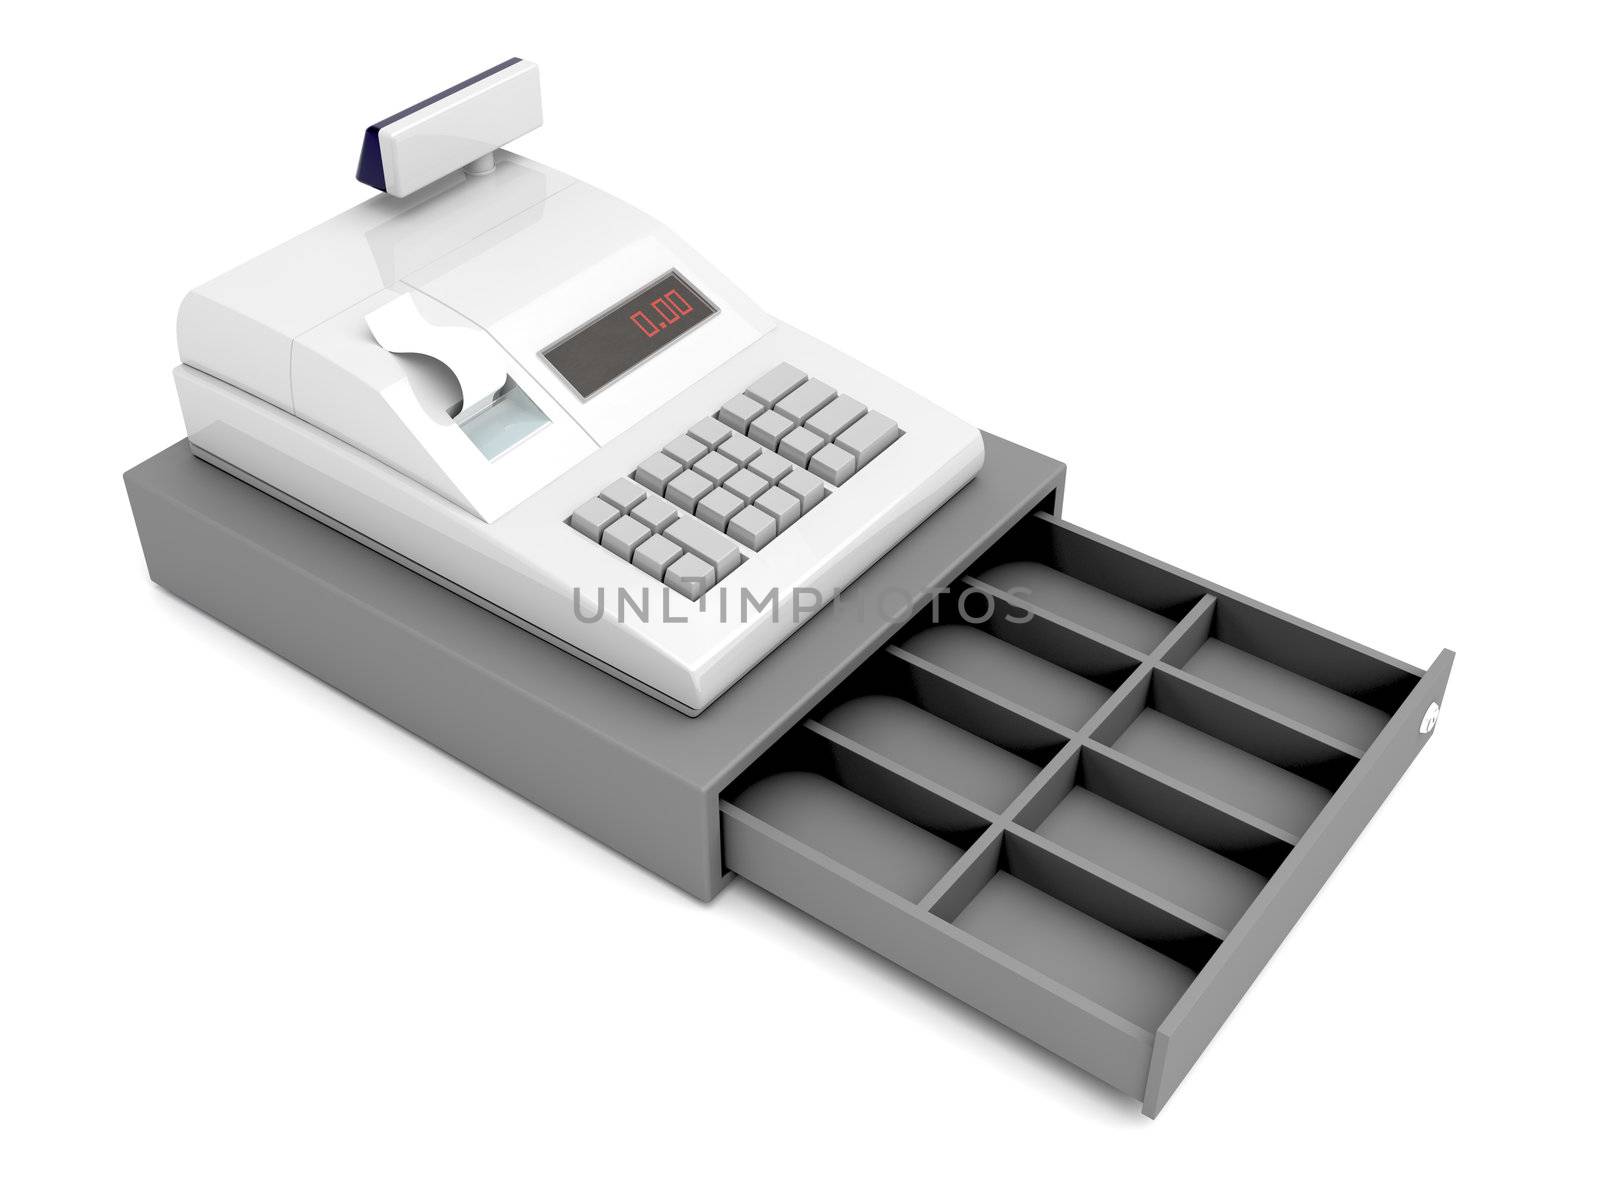 Cash register without money by magraphics